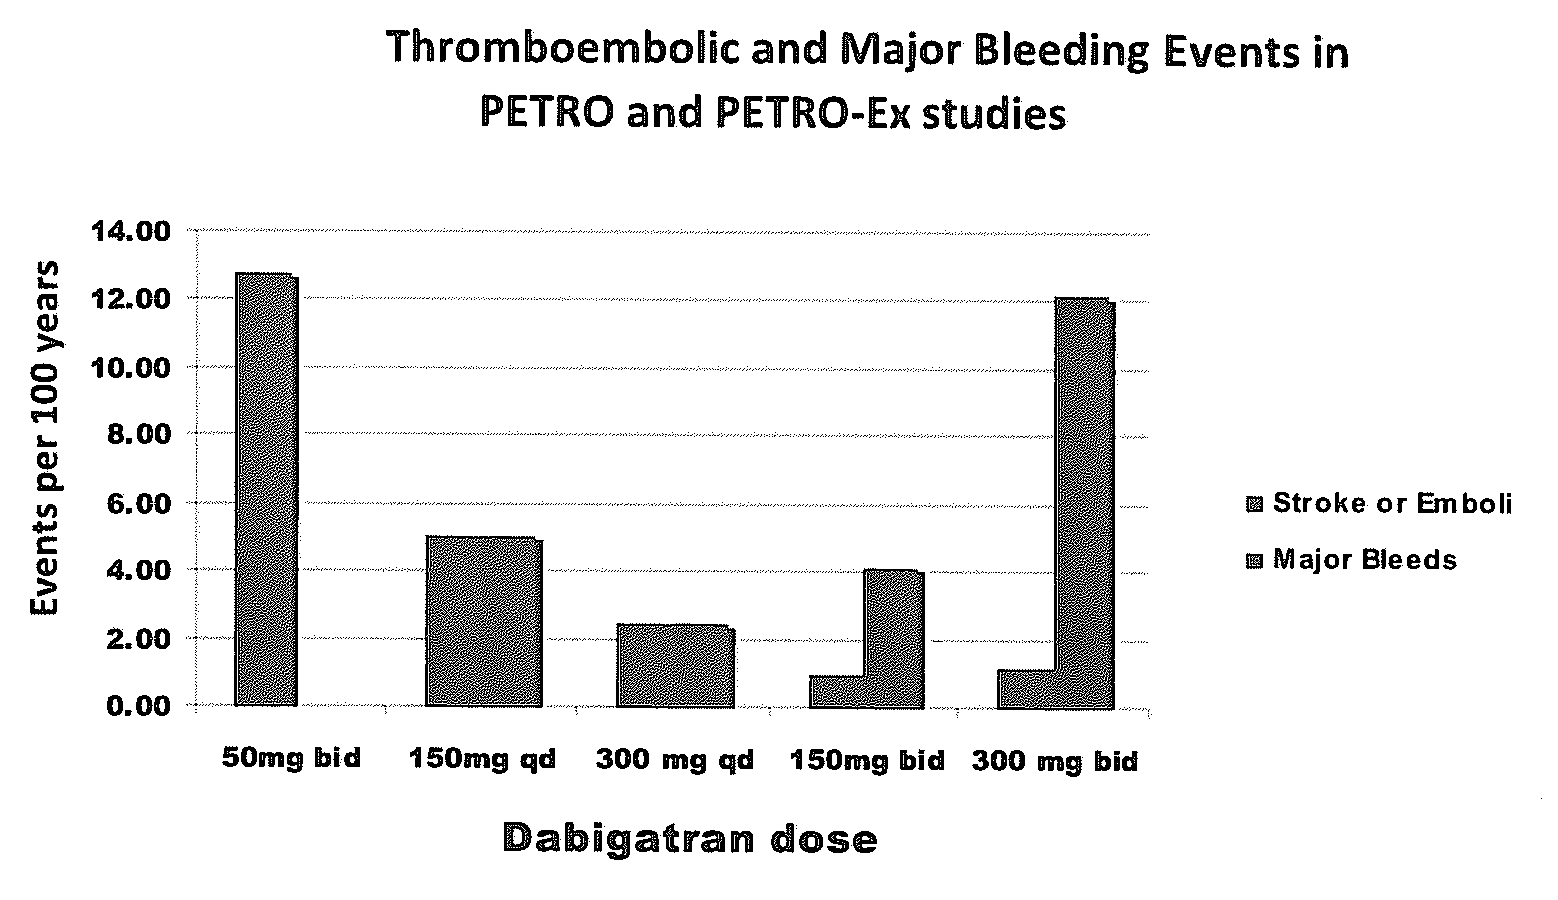 Method for treating or preventing thrombosis using dabigatran etexilate or a salt thereof with improved safety profile over conventional warfarin therapy